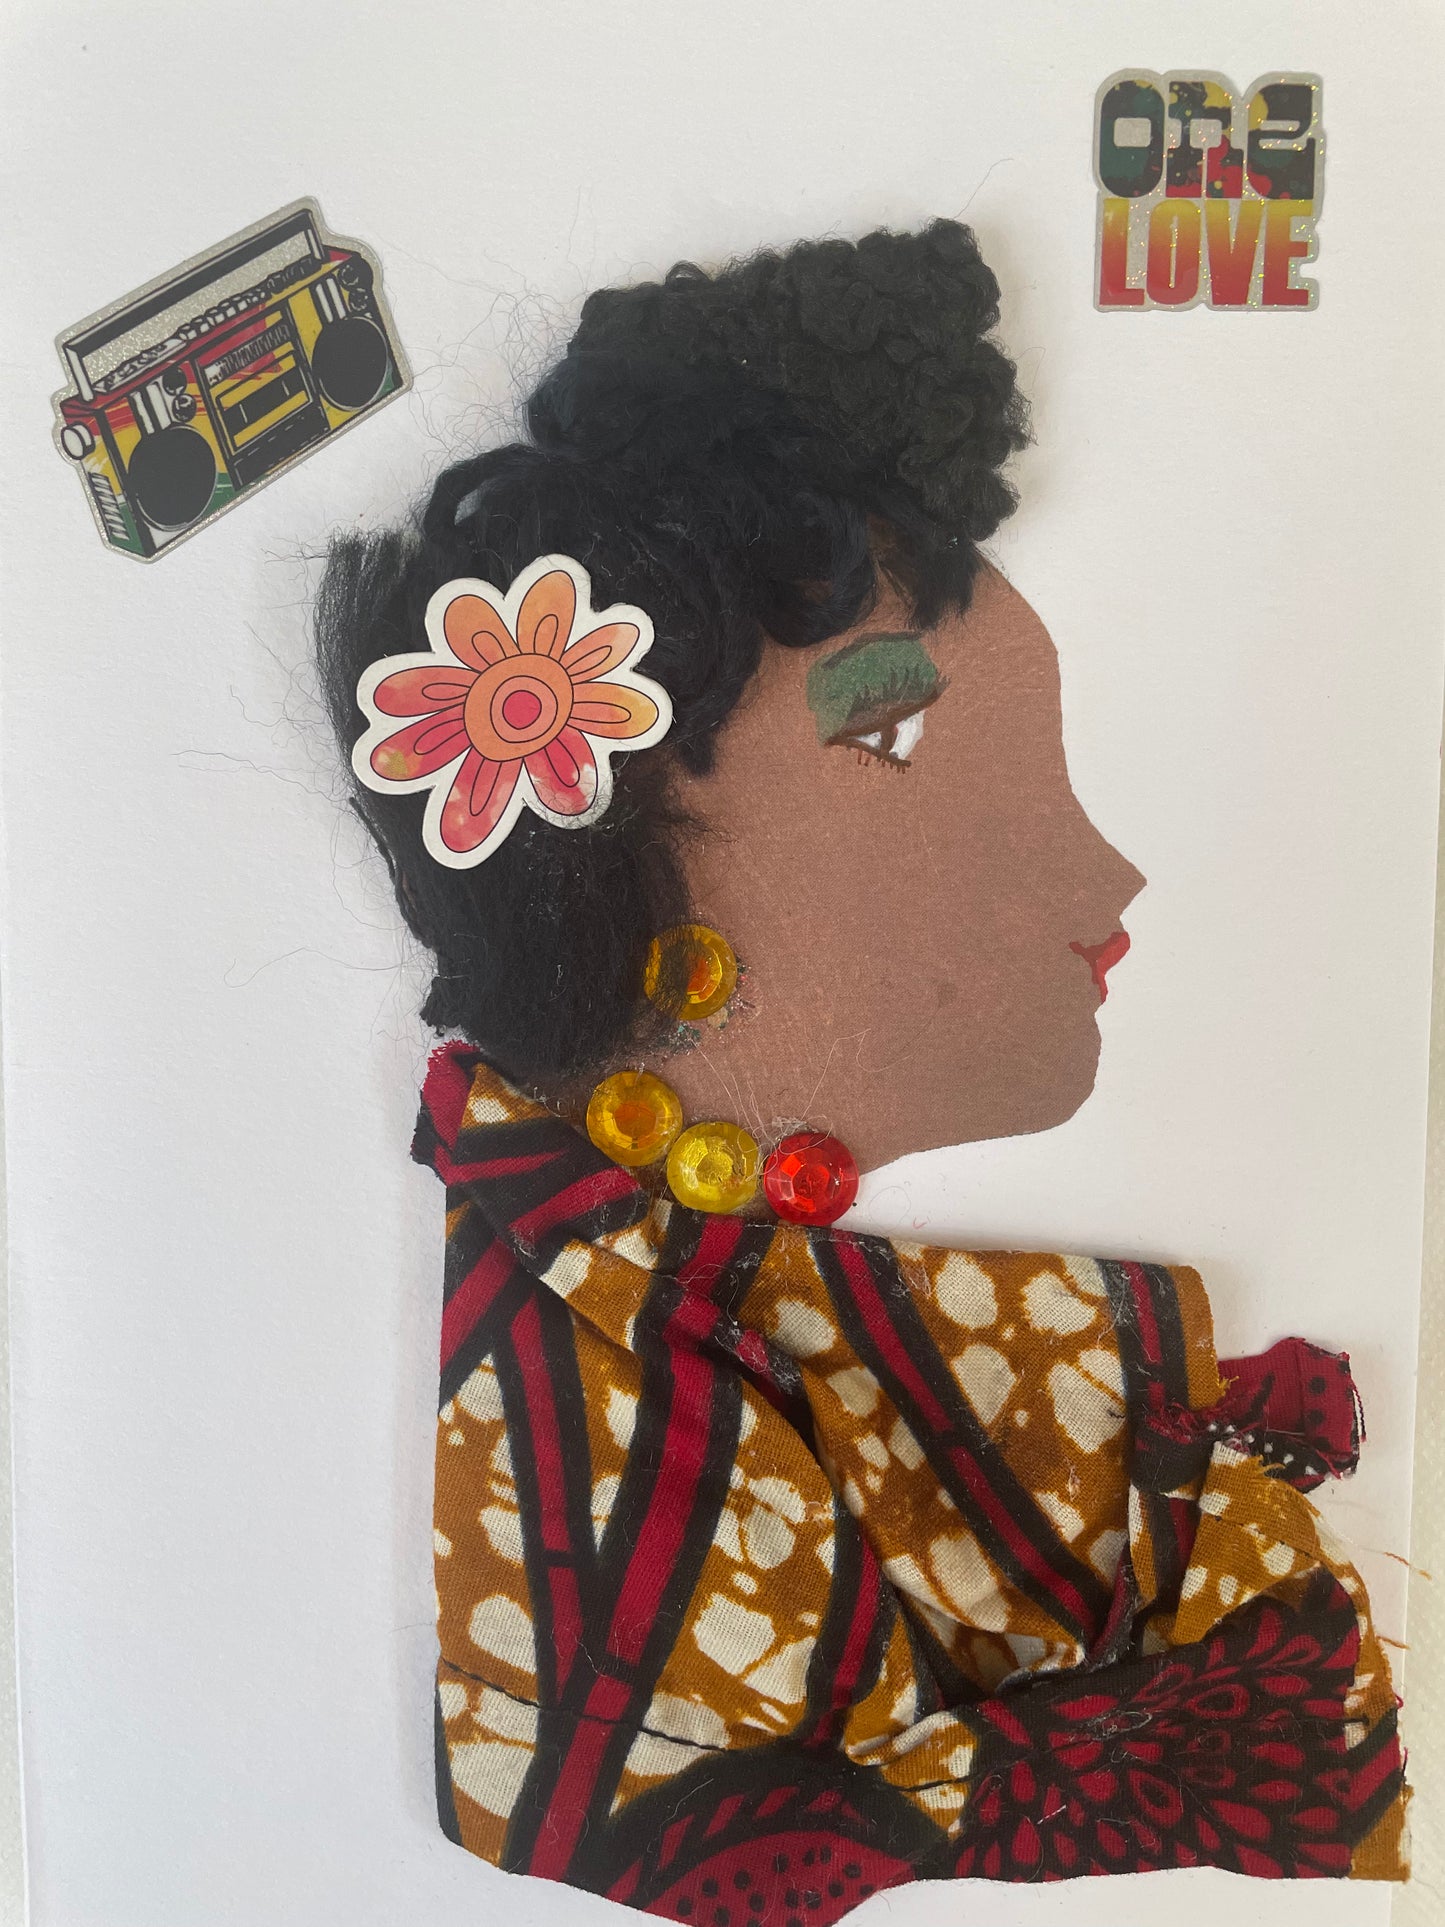 I designed this card of a woman named Brompton Benin. She wears a red and orange flower in her hair. She wears an ankara blouse. She wears yellow and red jewellery. In one corner it says one love and in the other corner there is a music player. 